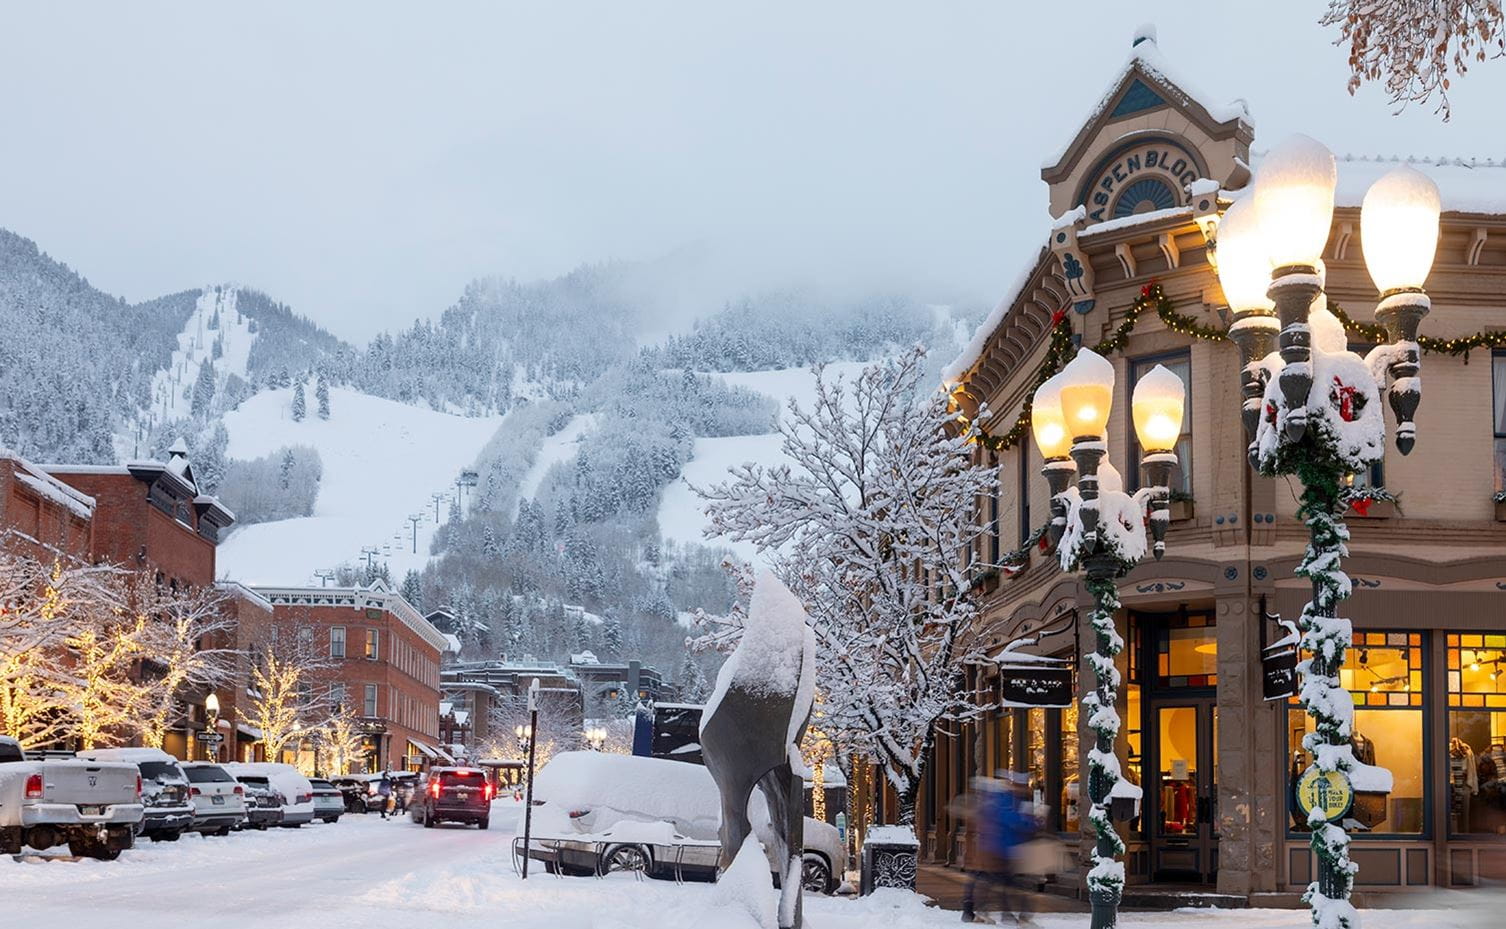 Downtown Aspen on a snowy afternoon